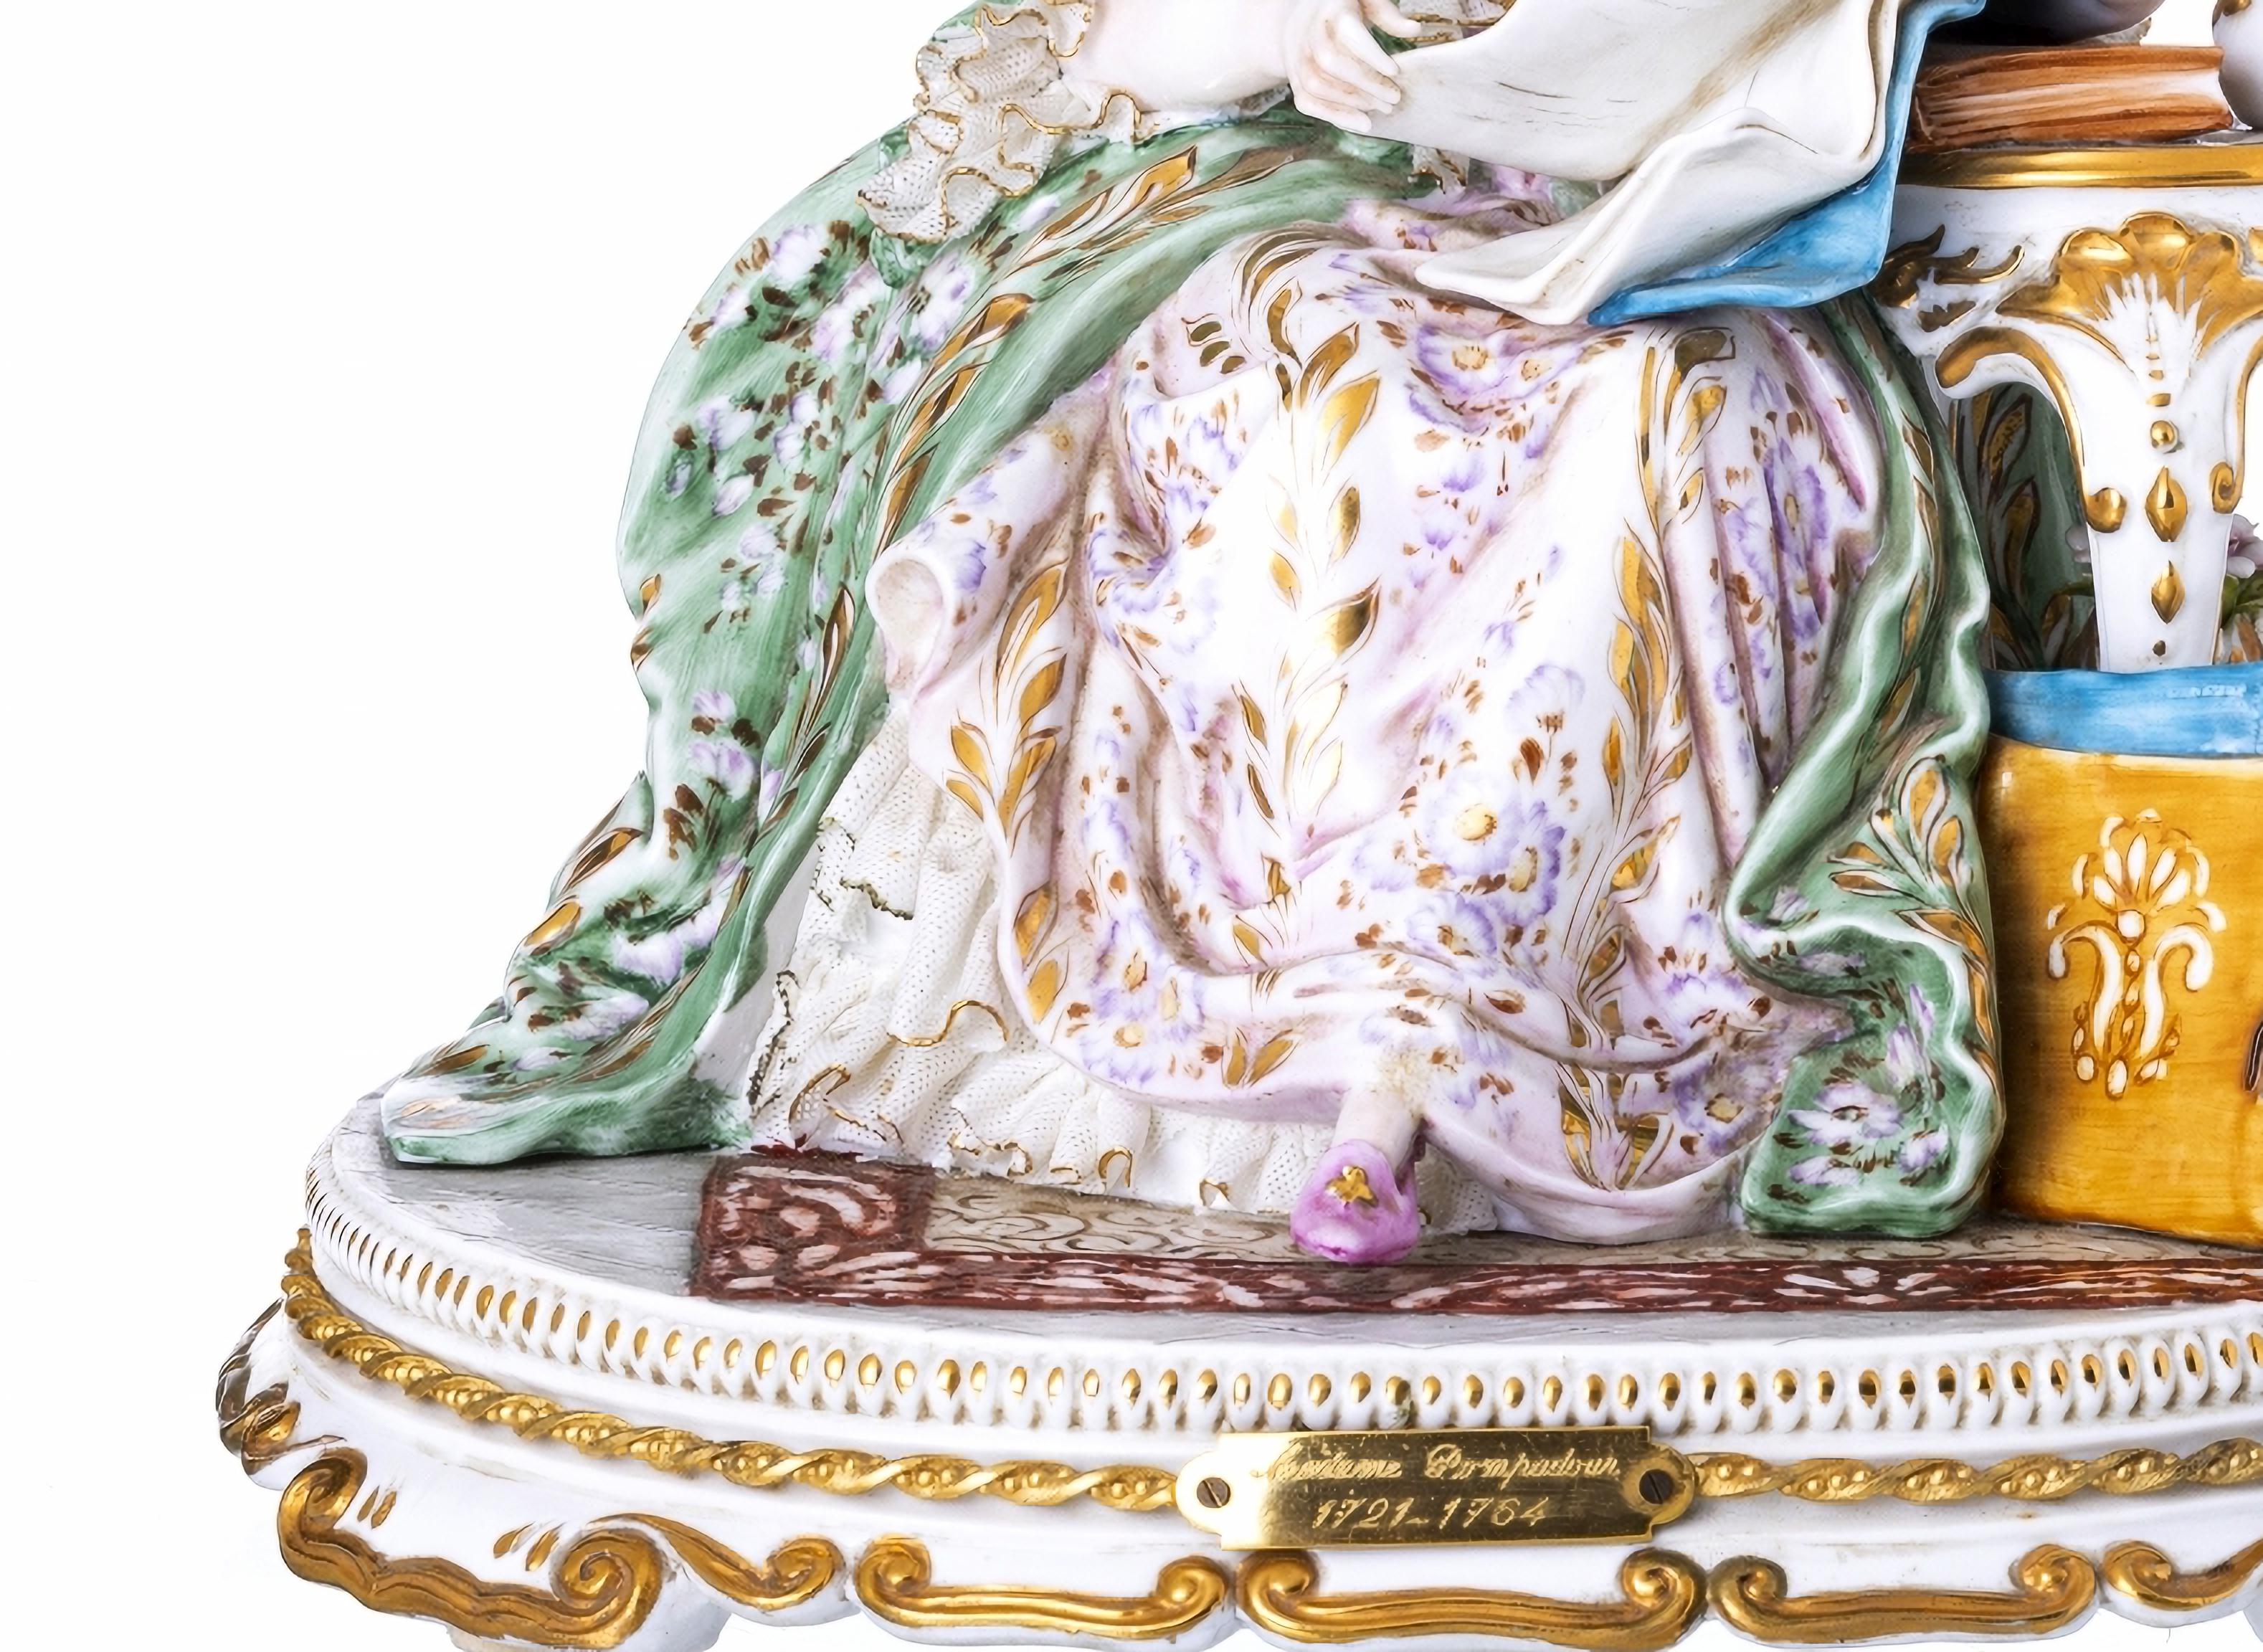 Madame Pompadour (1721-1764) 20th century Tiche Porcelain

Italian sculptural group in molded and relief porcelain by Tiche.
Polychrome and gilded decoration, hand-painted.
Manufacturer's mark on the base.
Dimensions: 29.5 x 30 cm.
Good